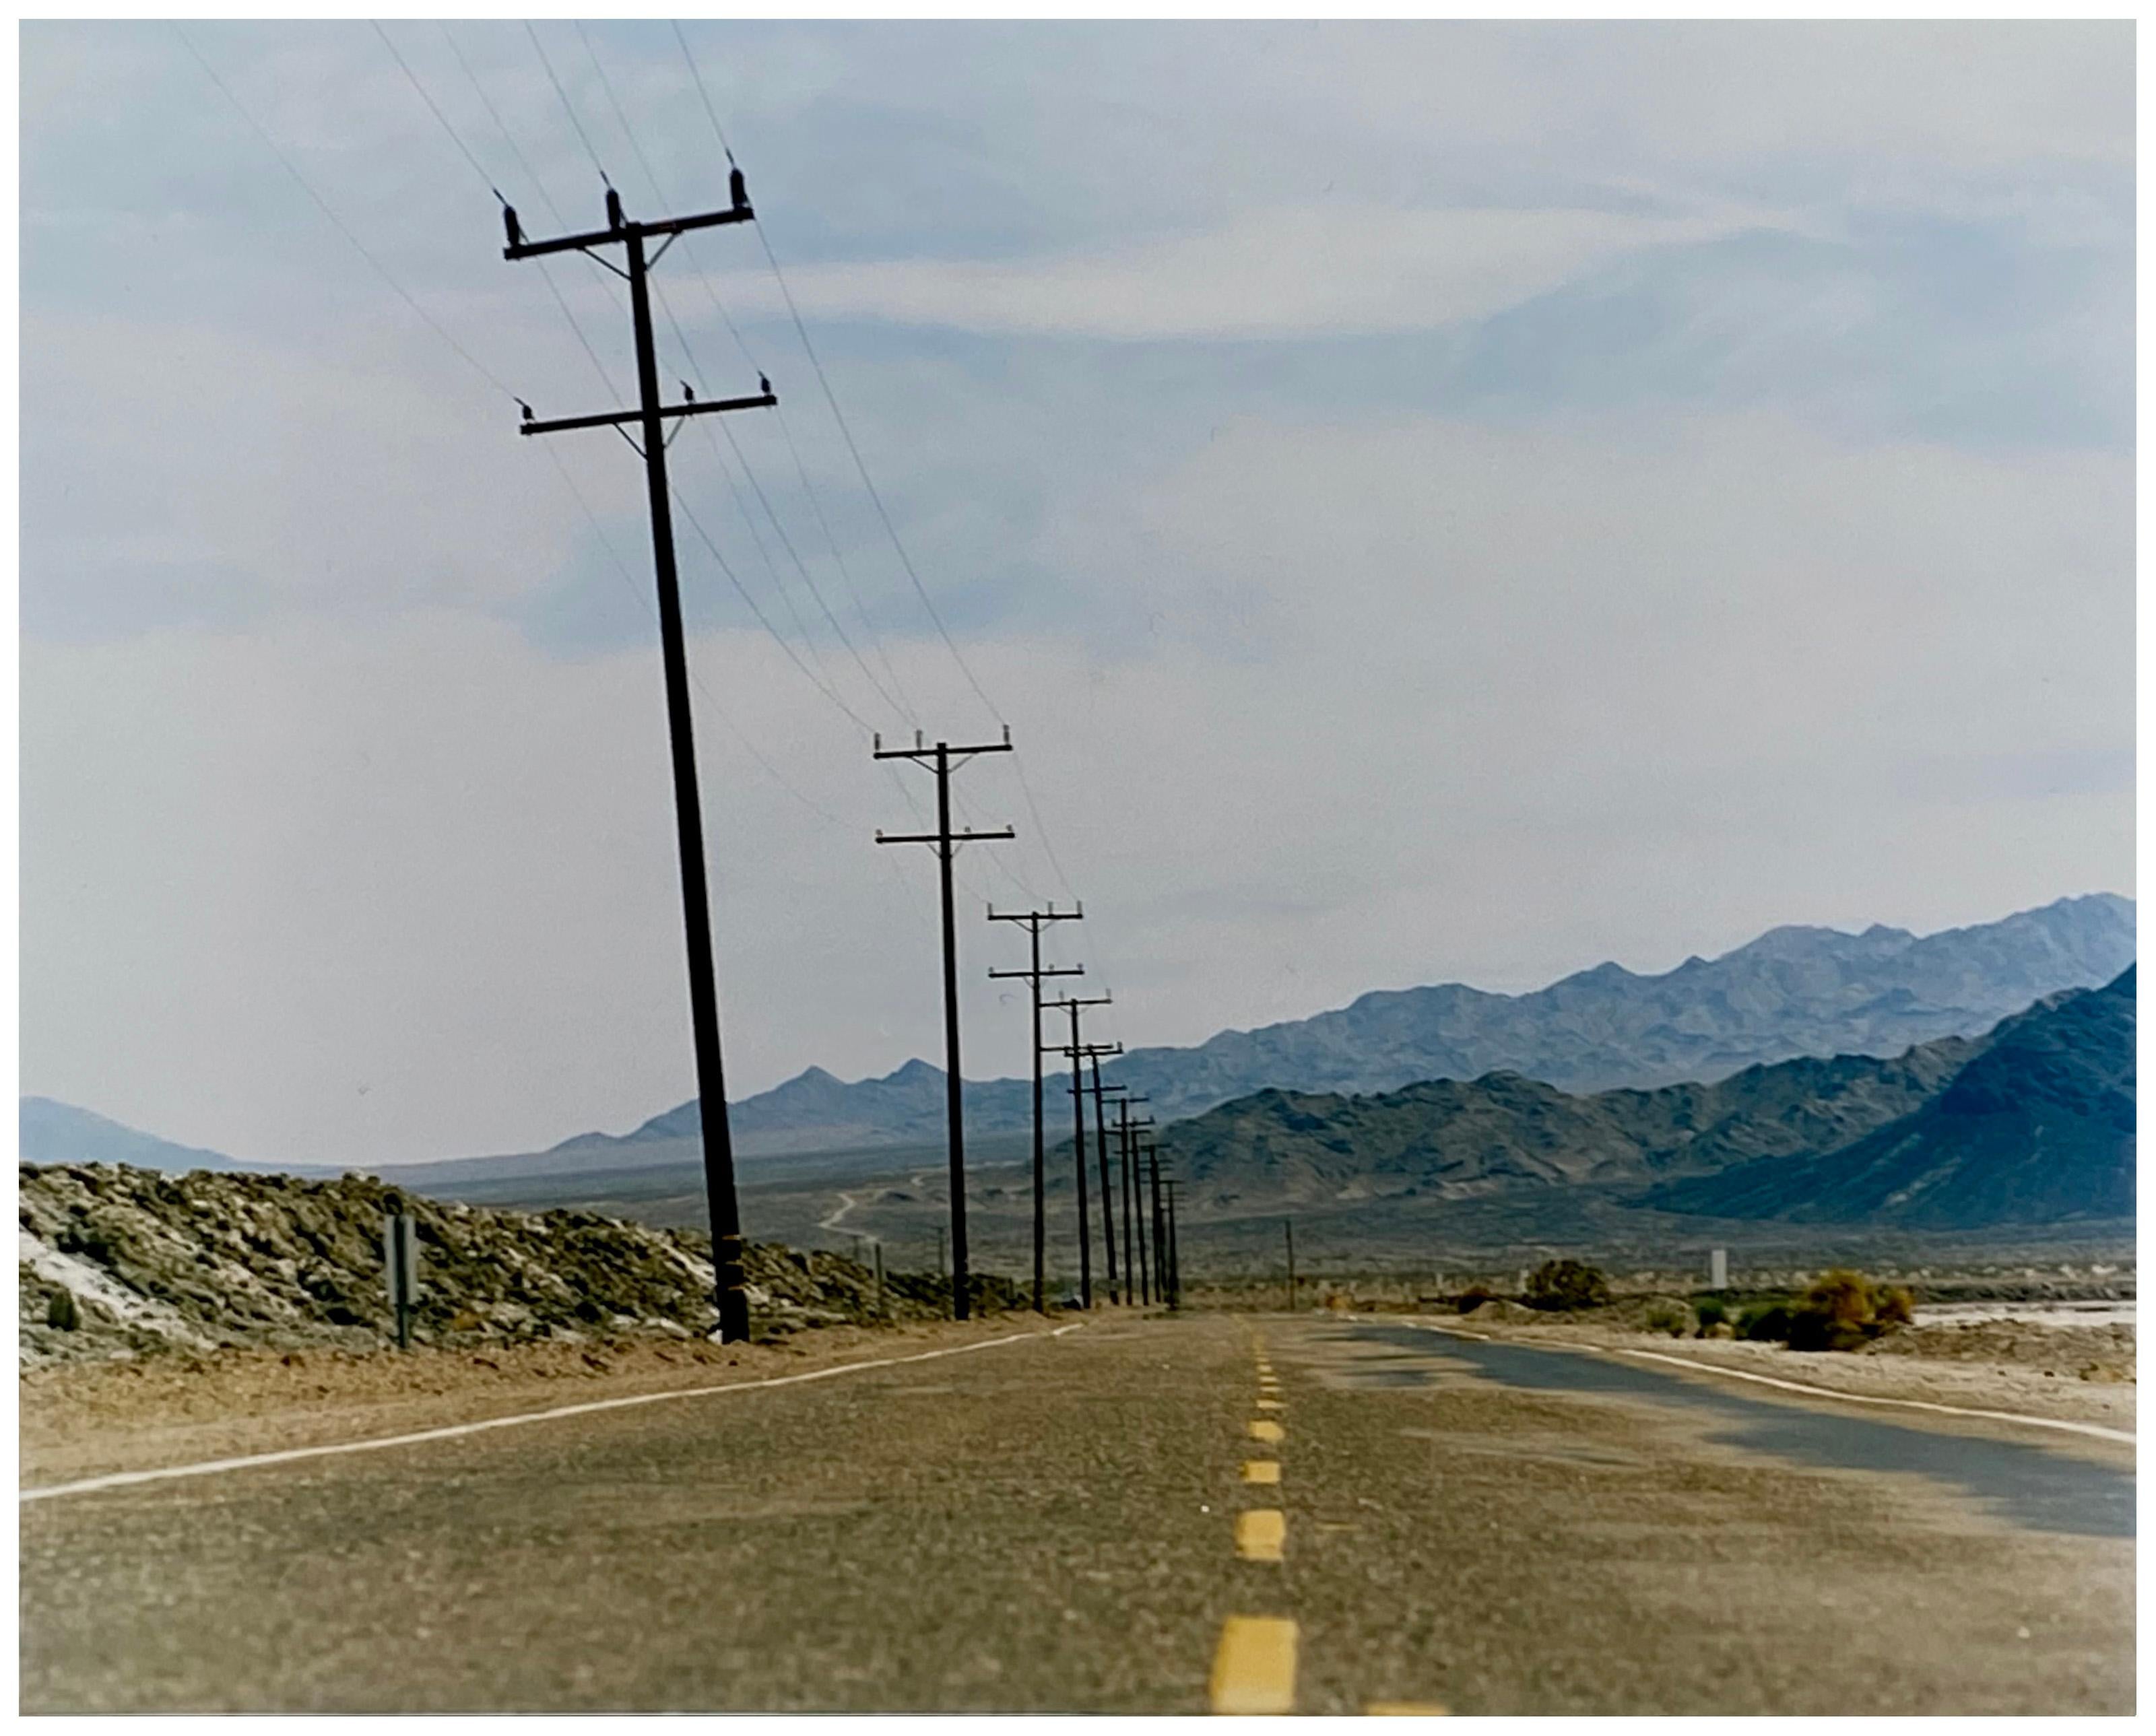 An open road in Amboy, California, featuring telephone poles disappearing into the mountainous distance. This classic and timeless landscape photograph is part of Richard Heeps' 'Dream in Colour' series. 

This artwork is a limited edition of 25,